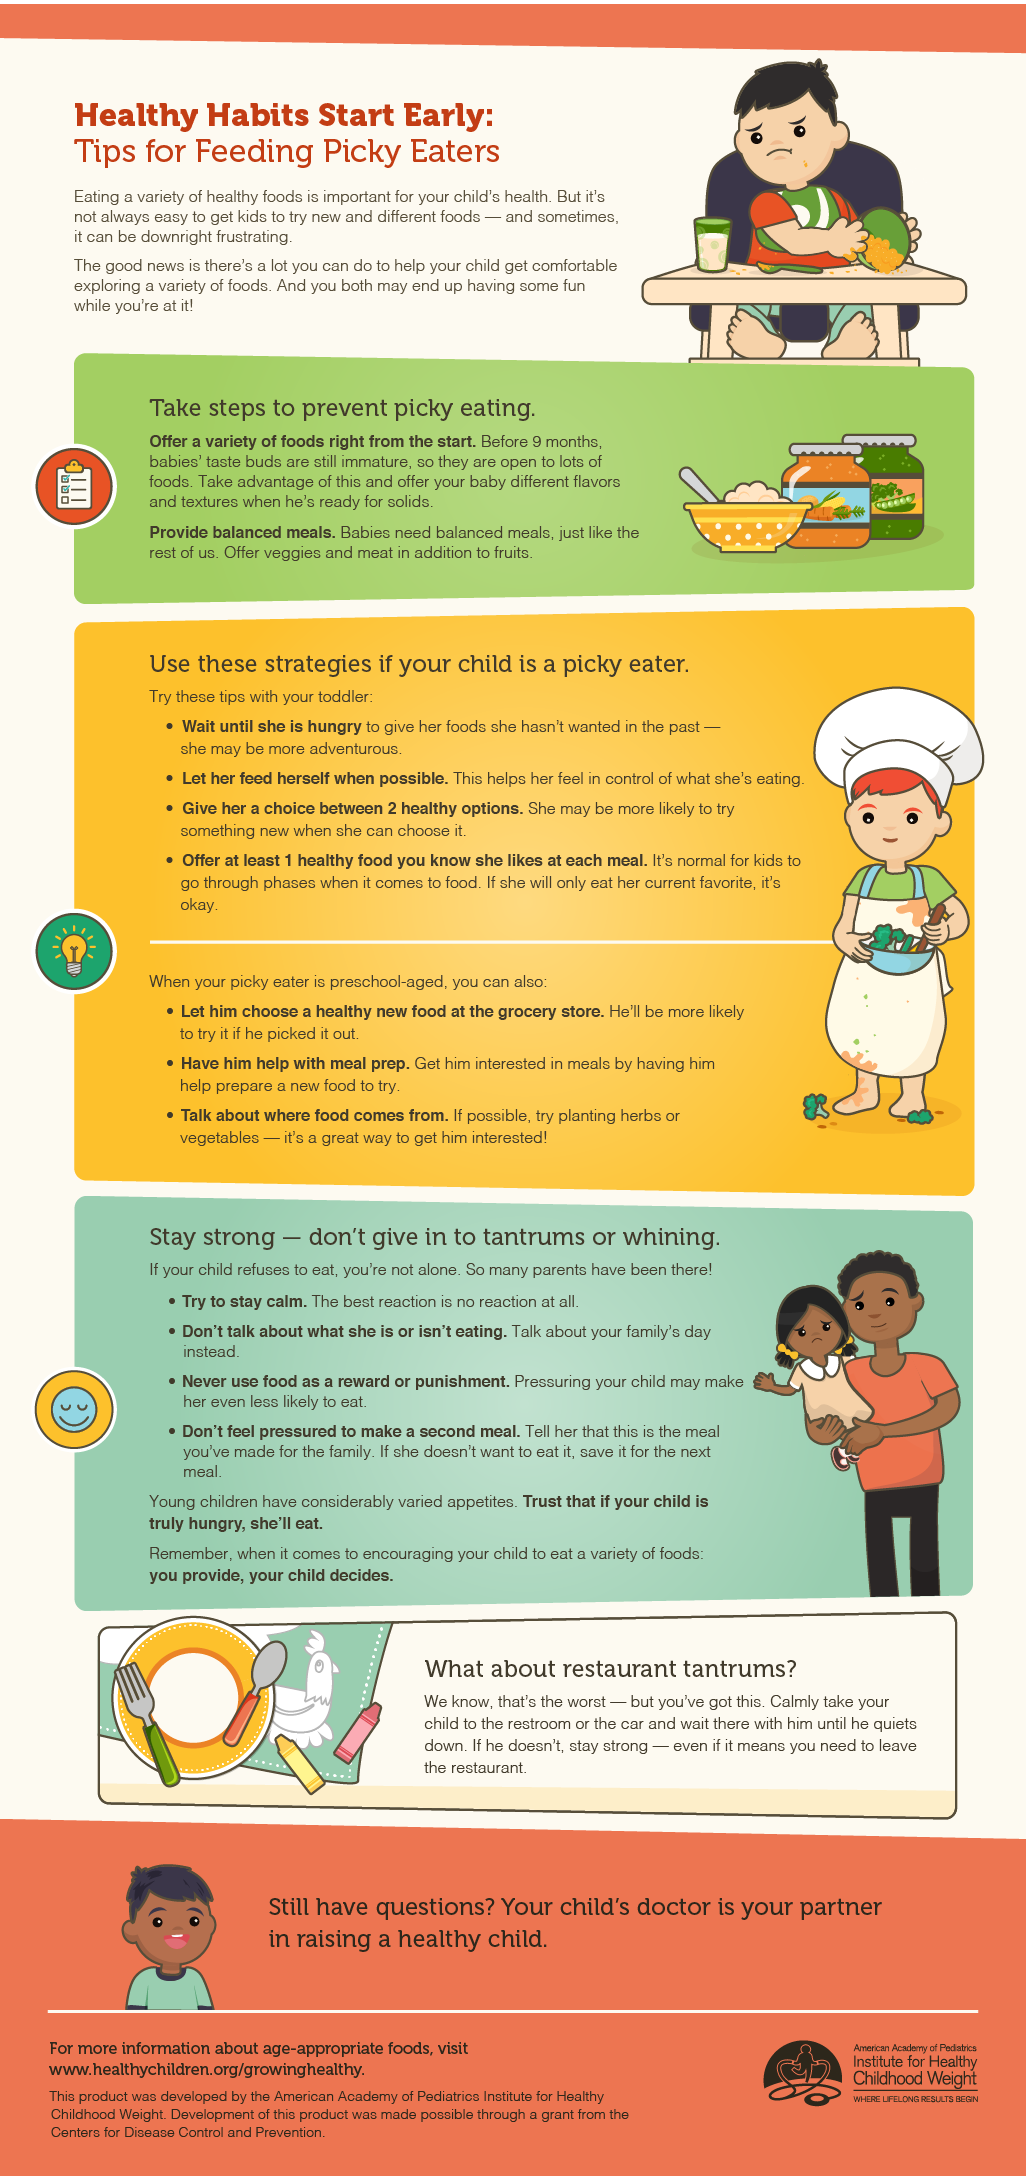 Infographic - Tips for Feeding Picky Eaters